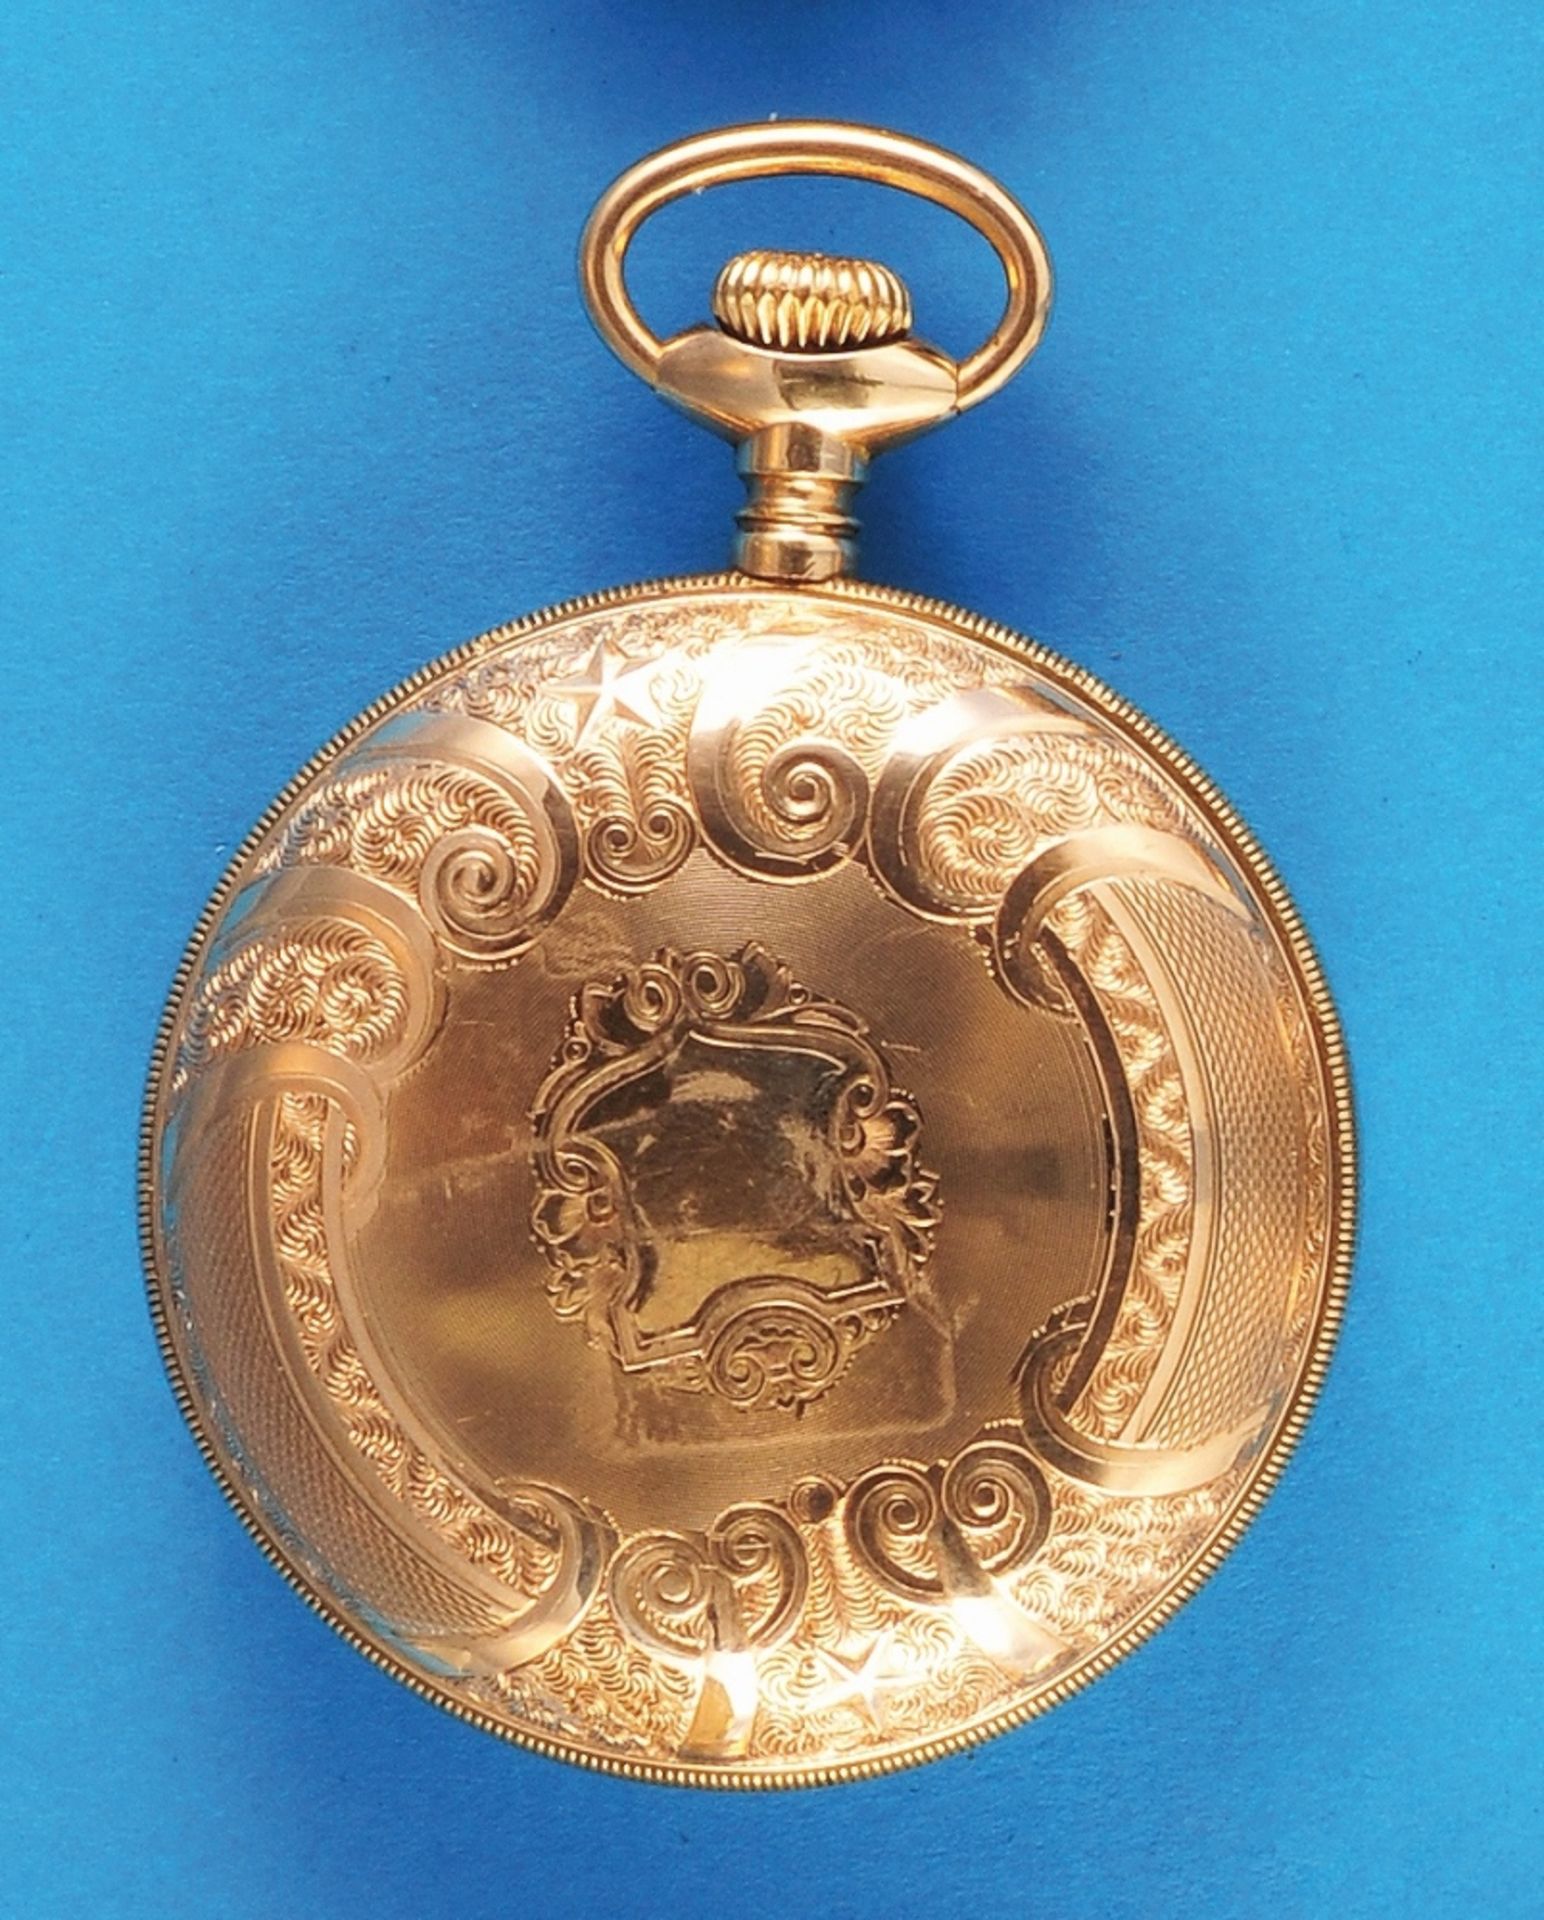 Hampden Watch Co, "Railway Special, Double Roller", large, richly engraved, gilt pocket watch with s